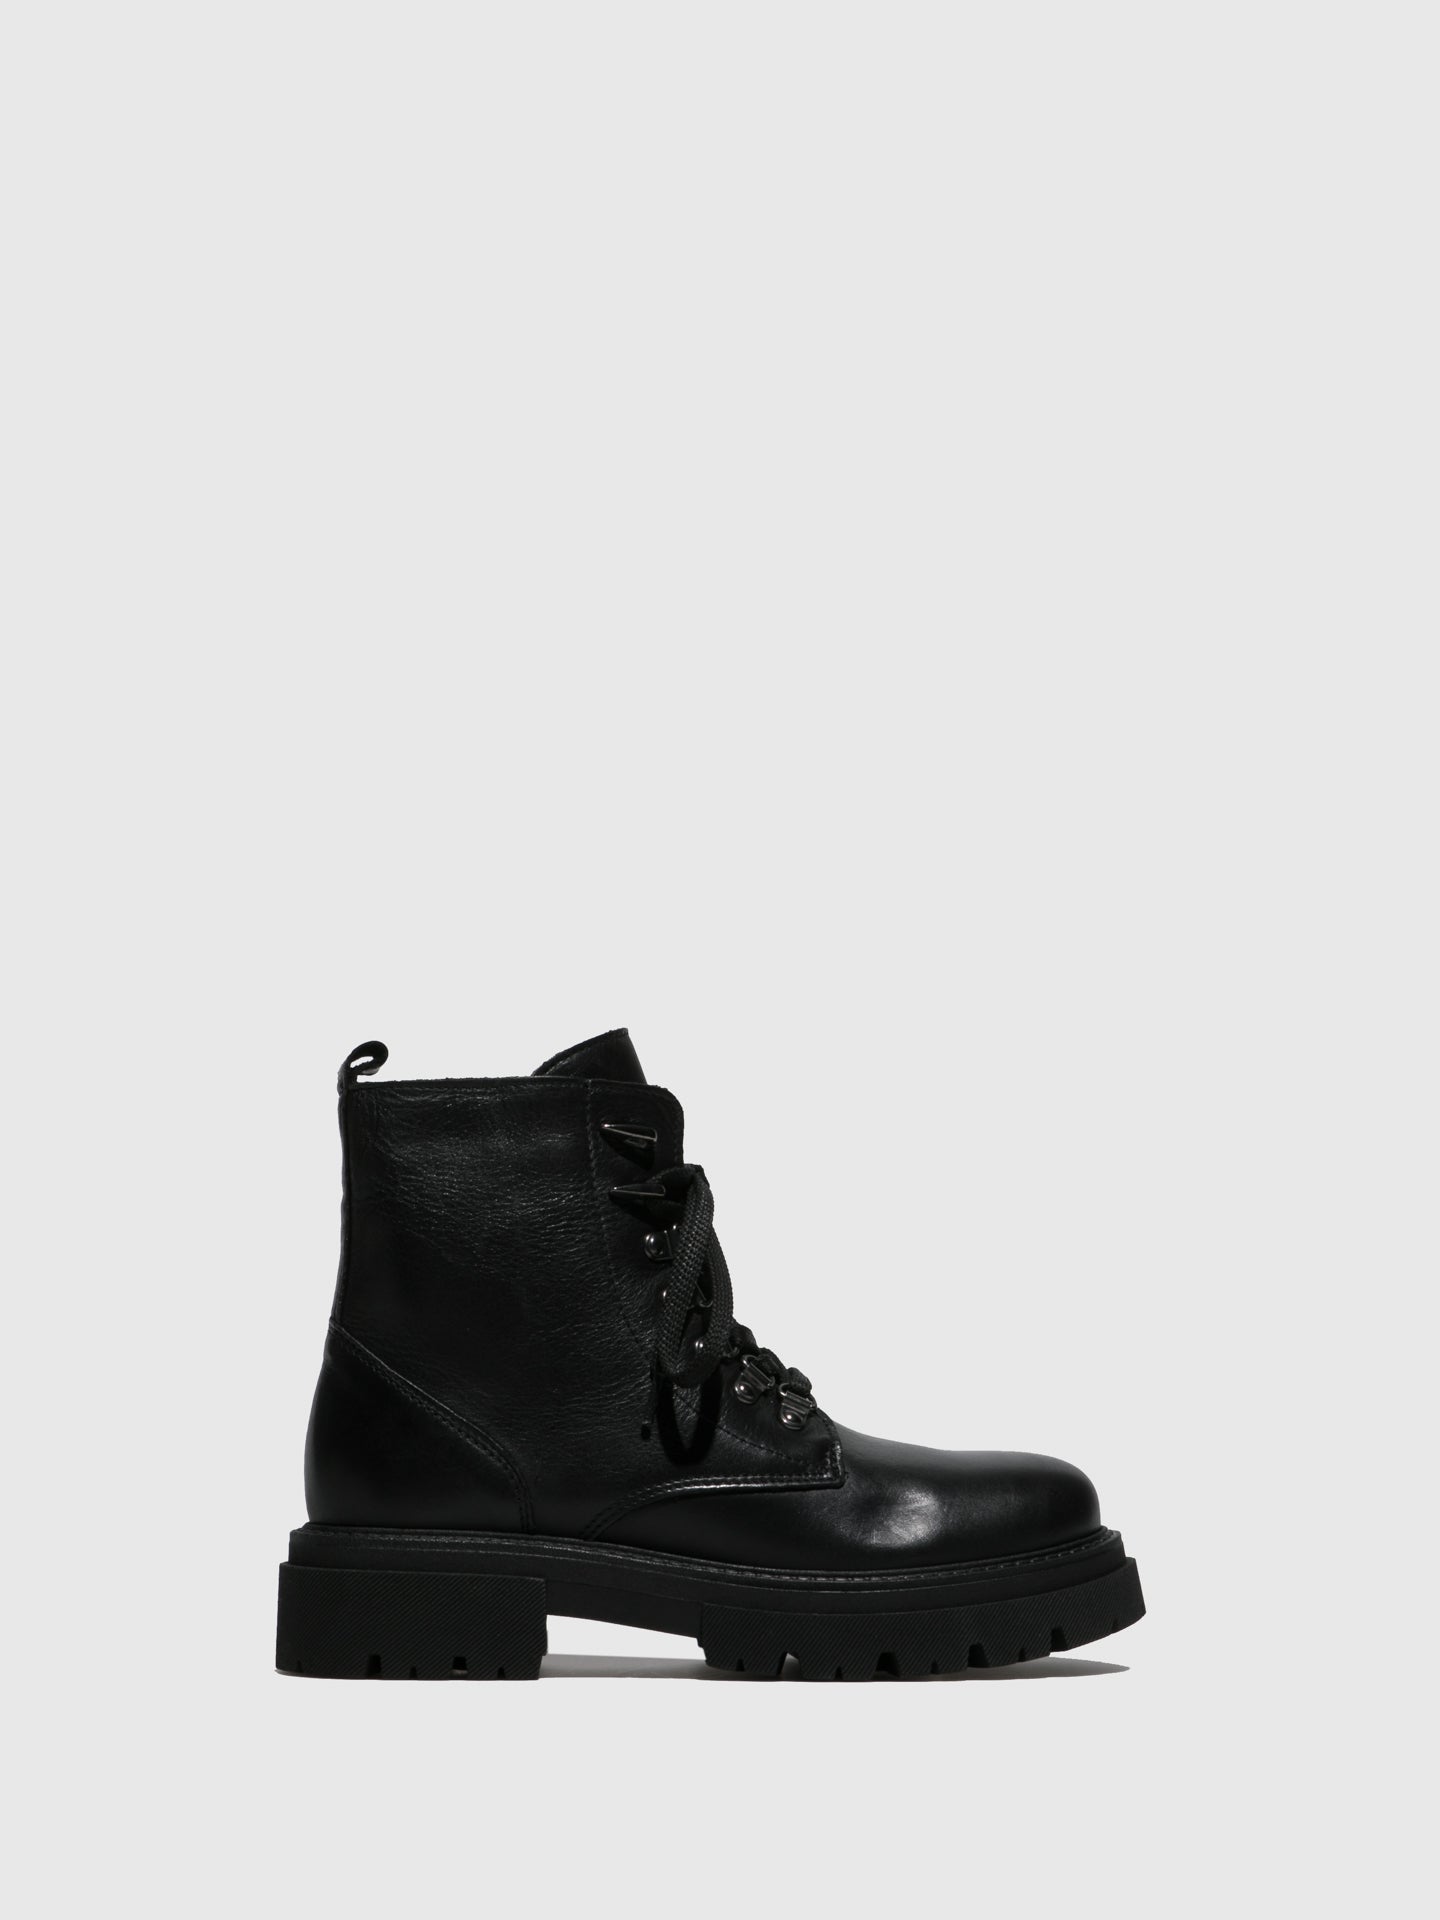 Fungi Black Lace-up Boots